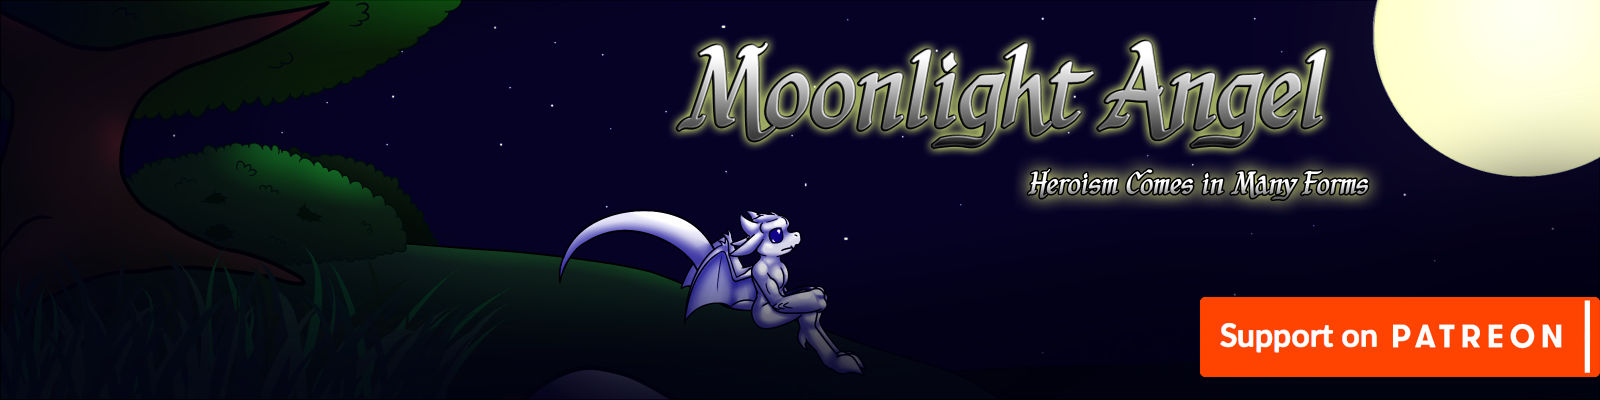 Moonlight Angel is now on Patreon!